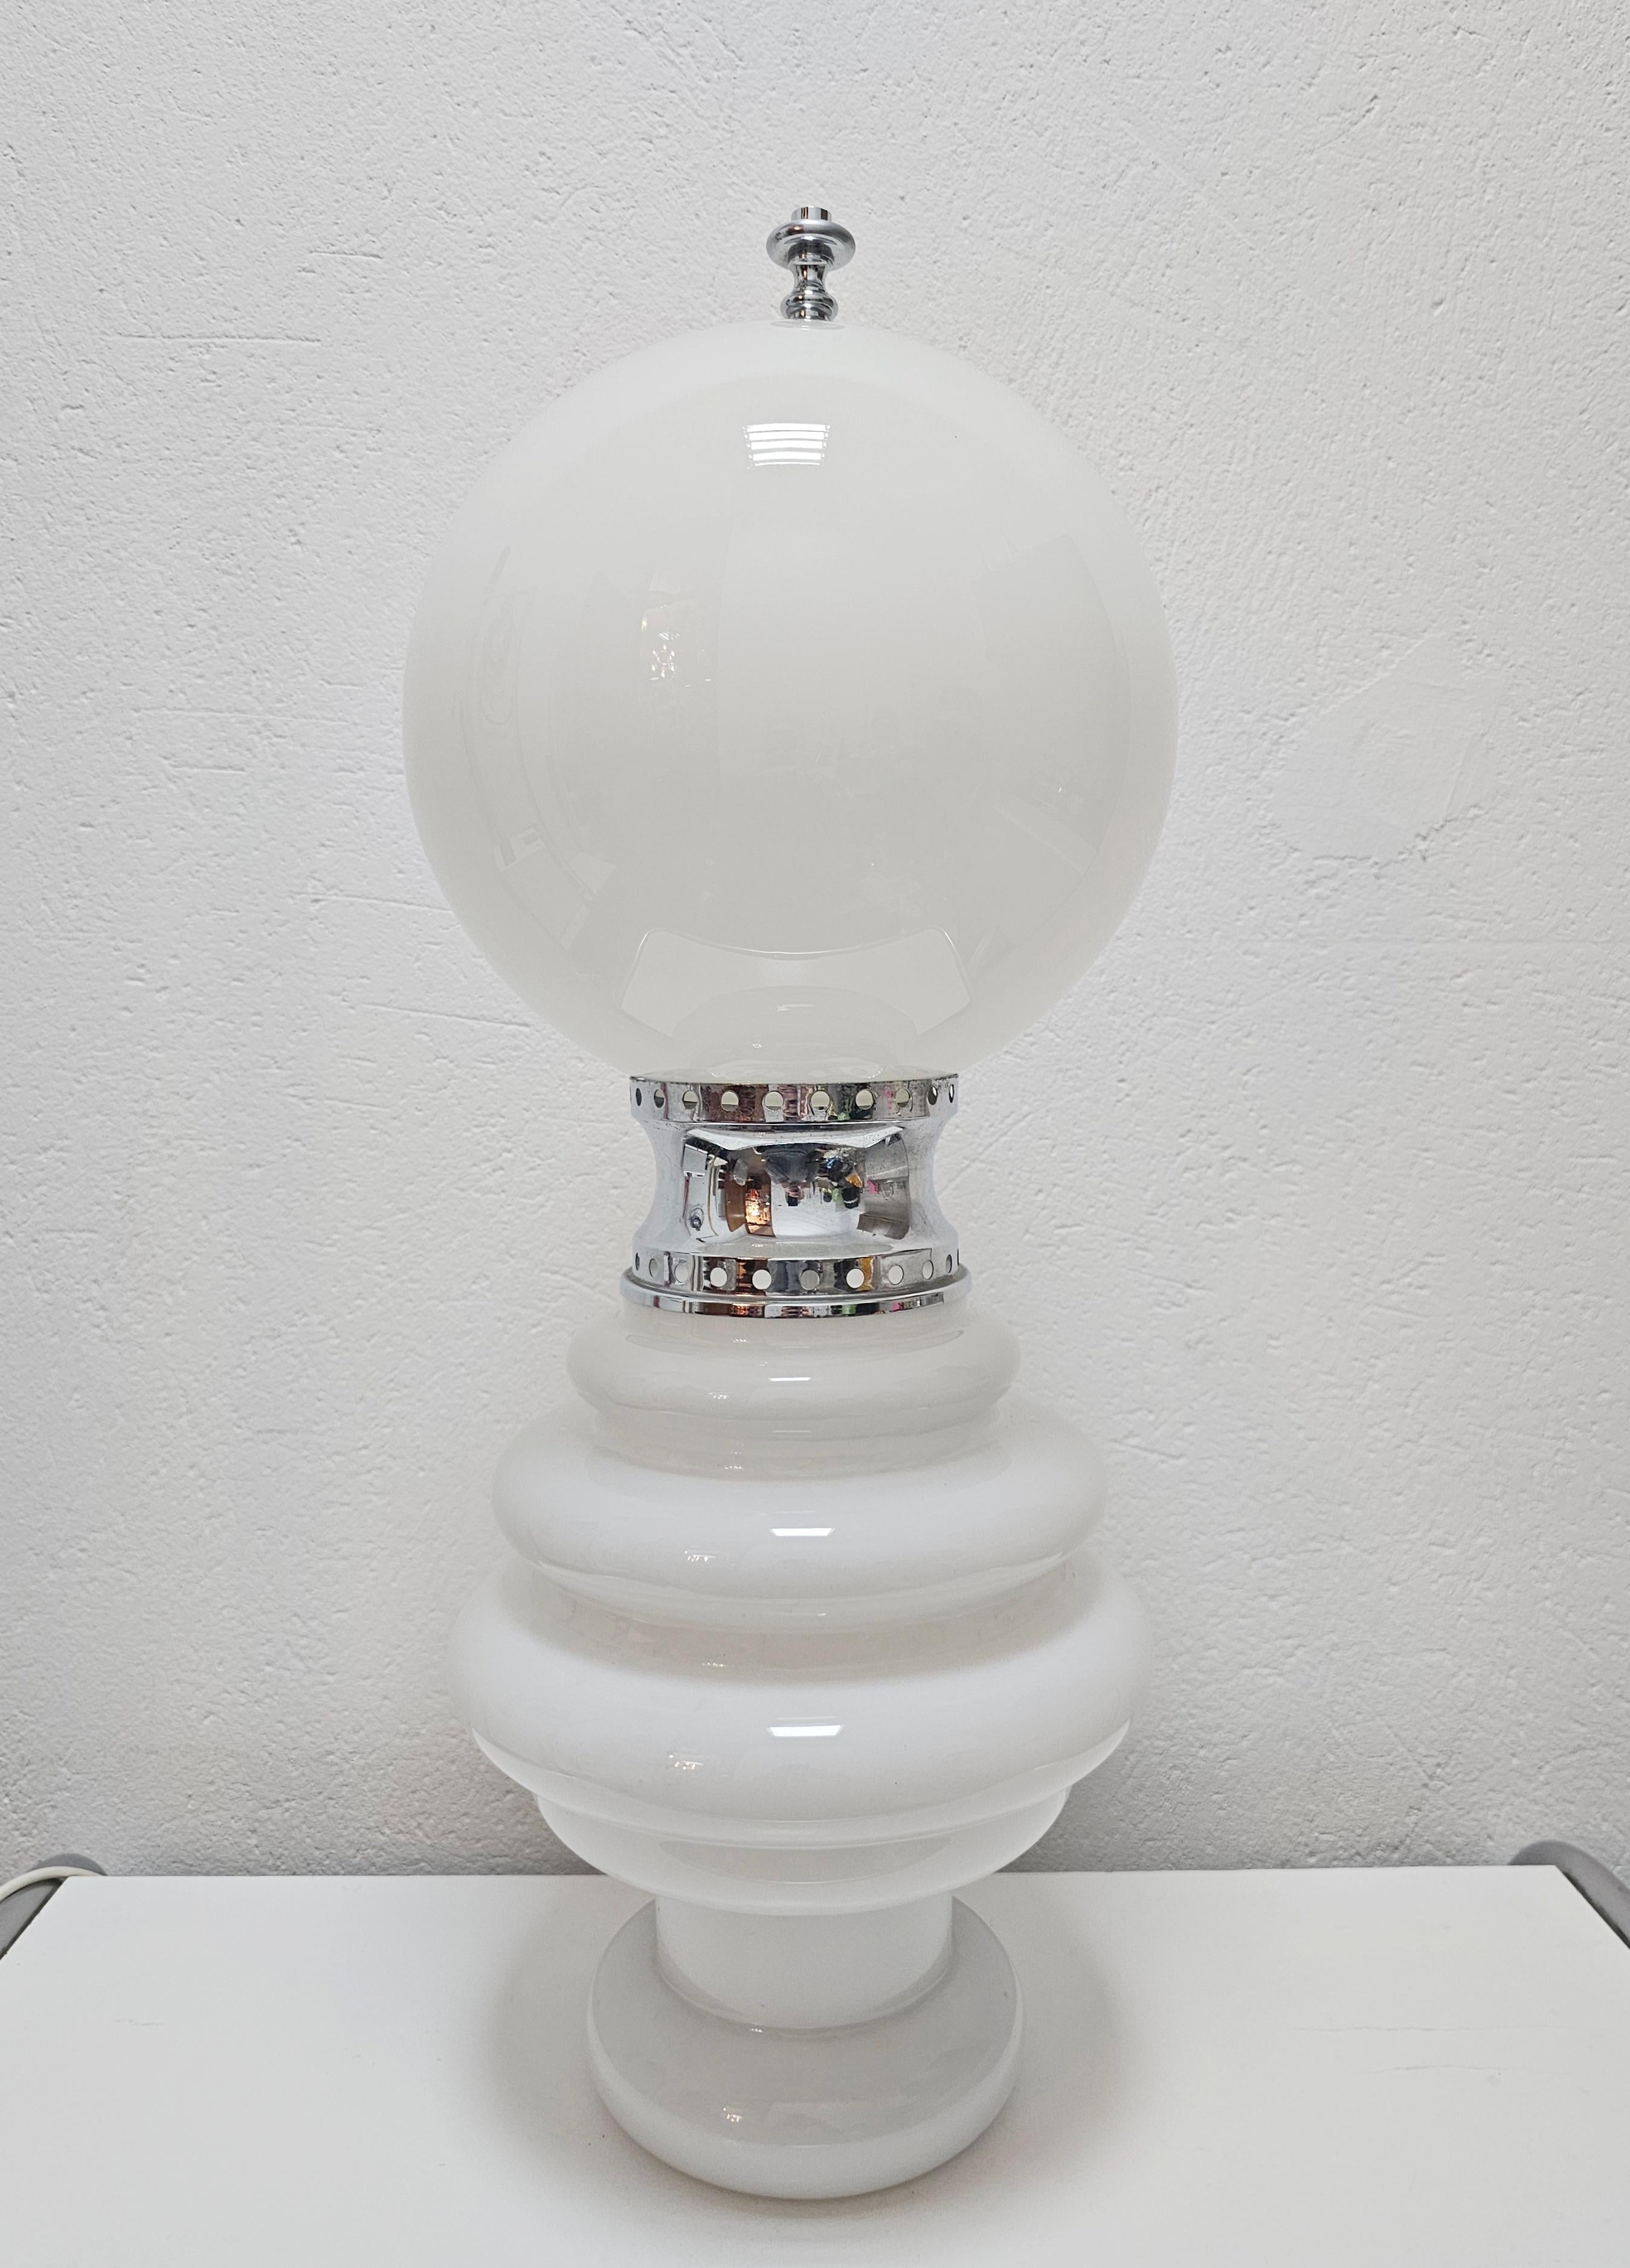 In this listing you will find a rare Space Age floor or a large table lamp designed by Carlo Nason for Mazzega. It is made of two white Murano glass parts that are connected with a silver ring. Each part of the lamp is lit by a pair of E14 light